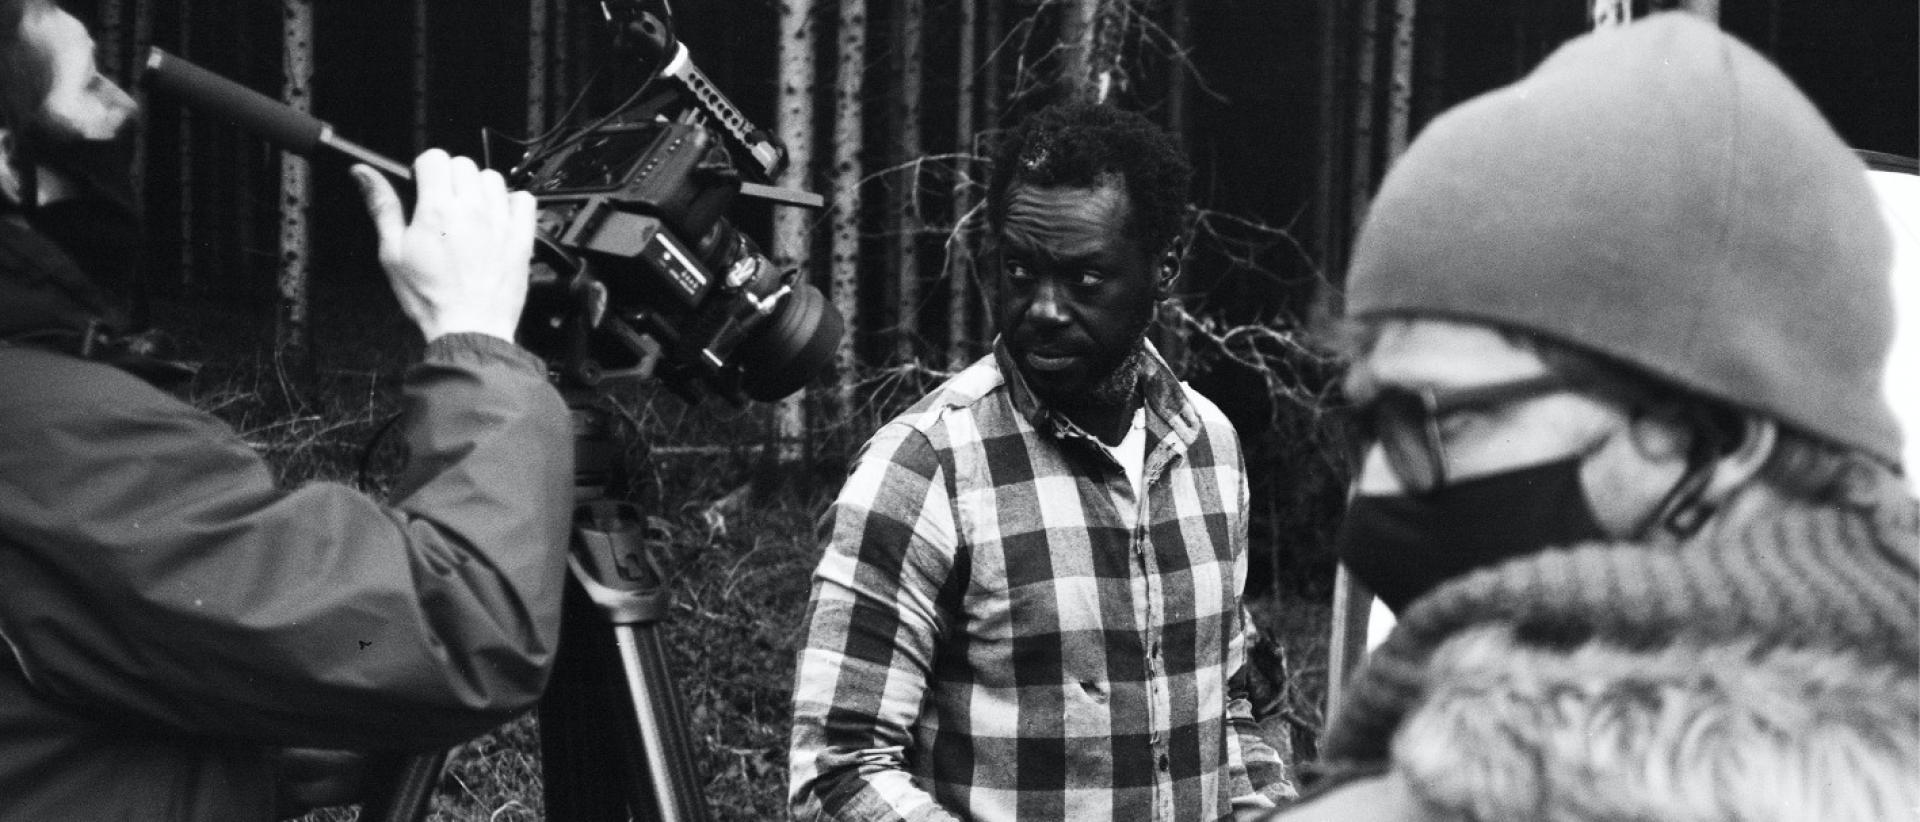 a black and white photo of three people making a film in a wooded area